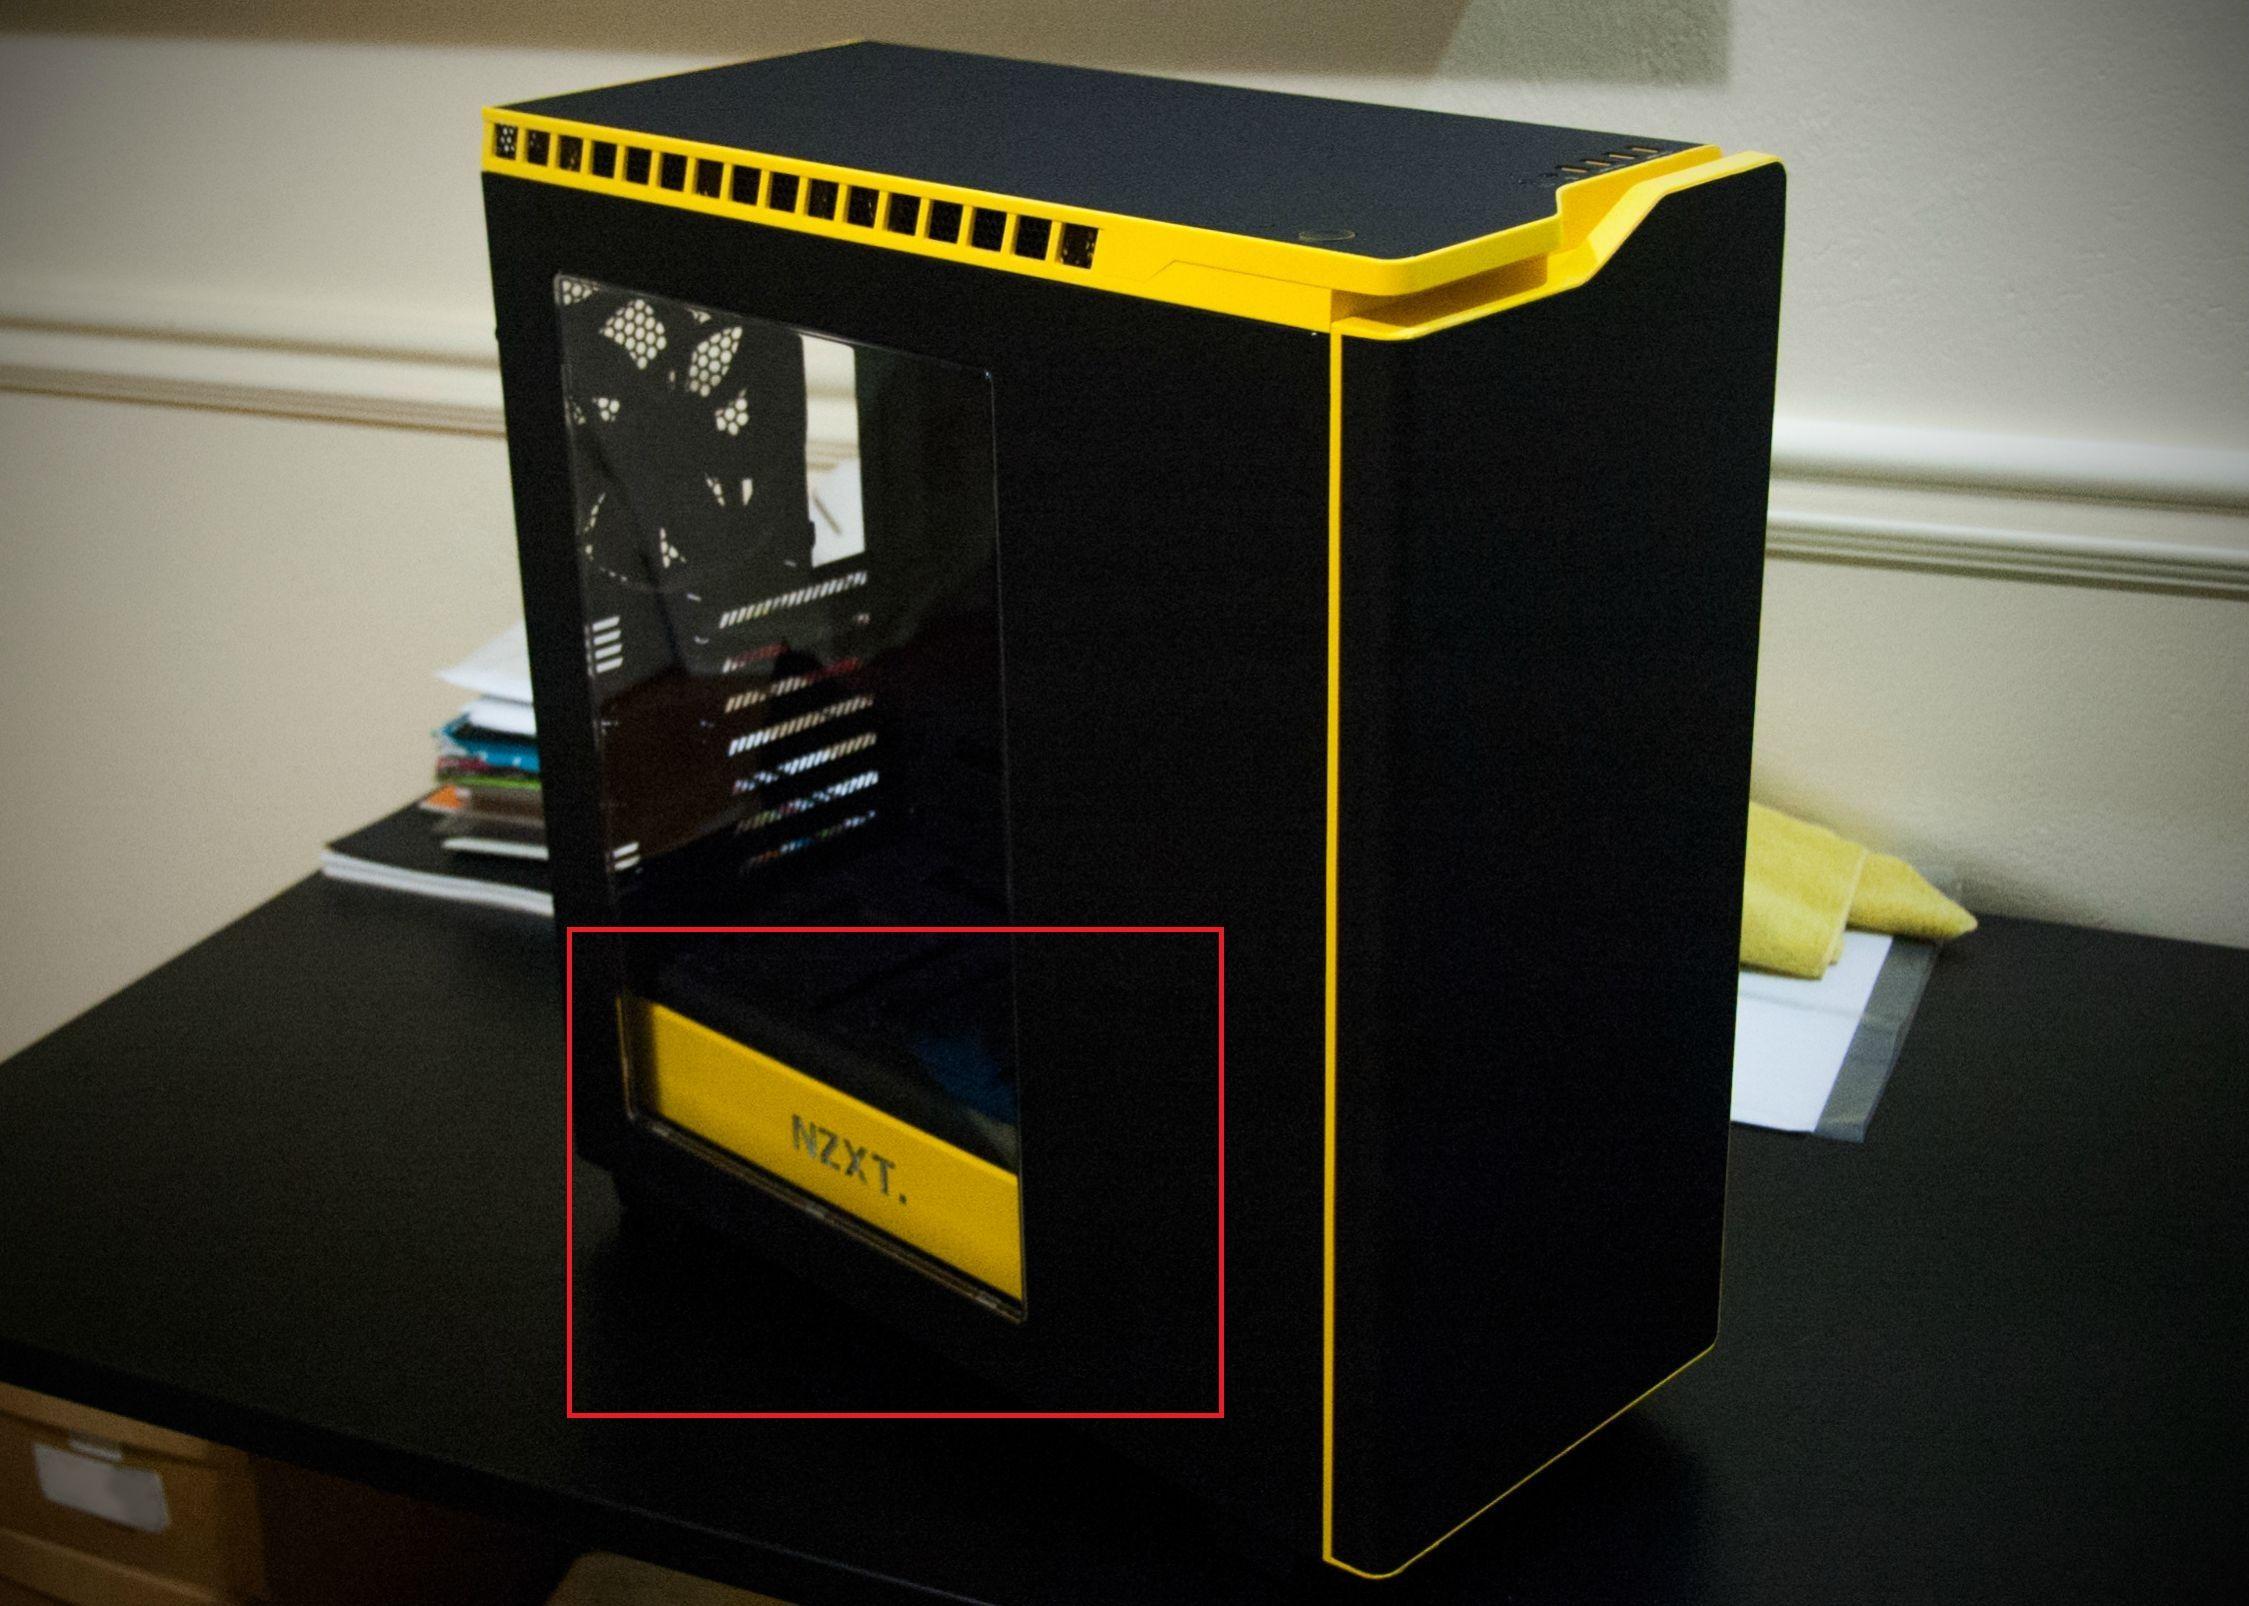 NZXT Logo - Where can I get a NZXT replacement logo? - Cases and Power Supplies ...